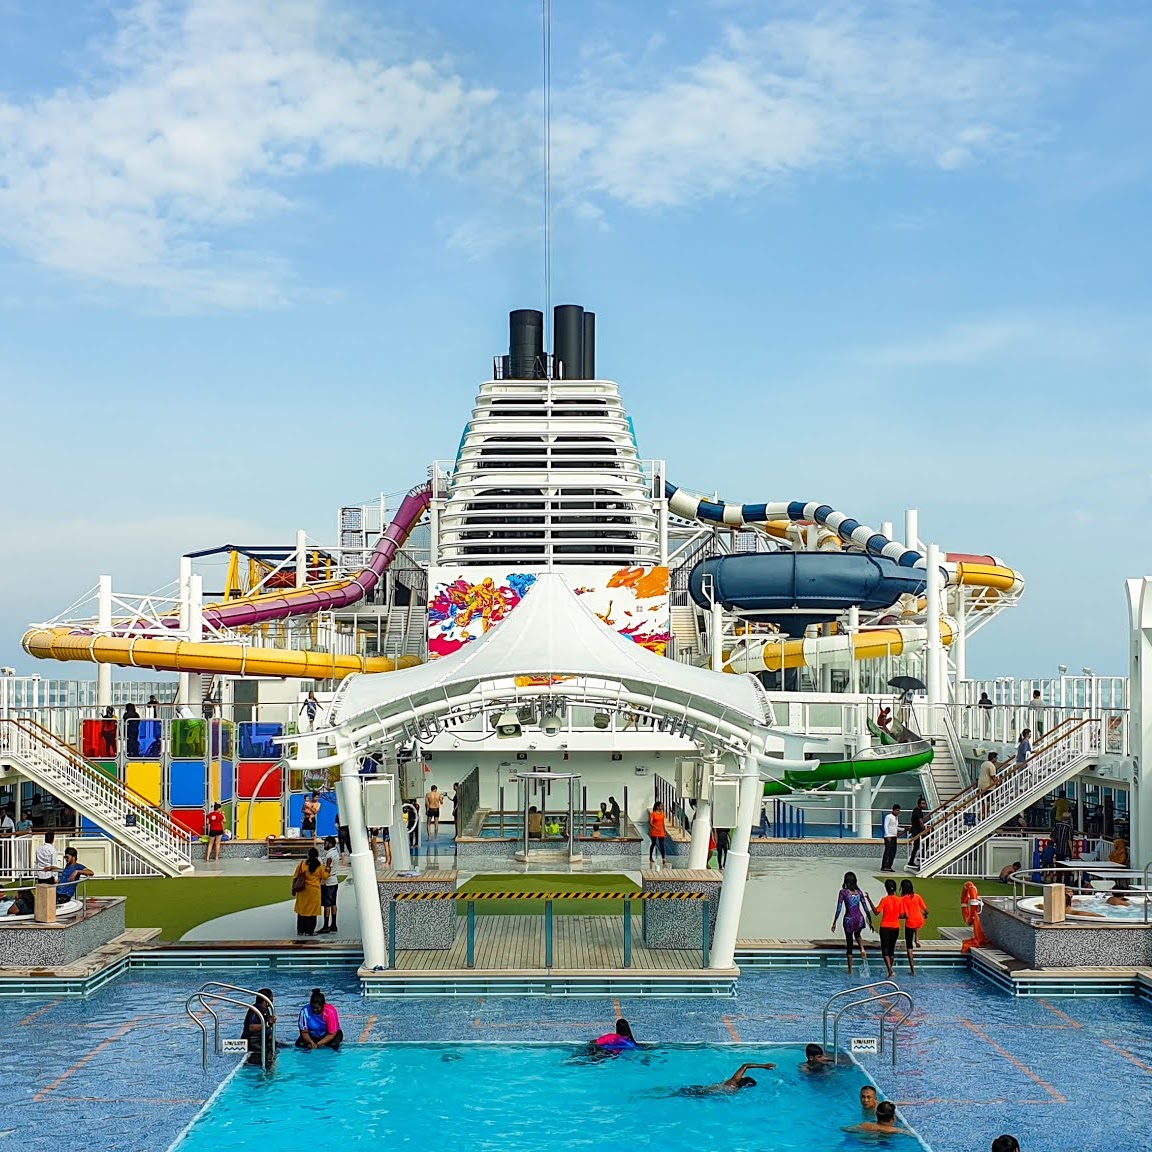 https://www.littlemissedna.com/2019/05/dream-cruise-palace-exclusive-privileges.html